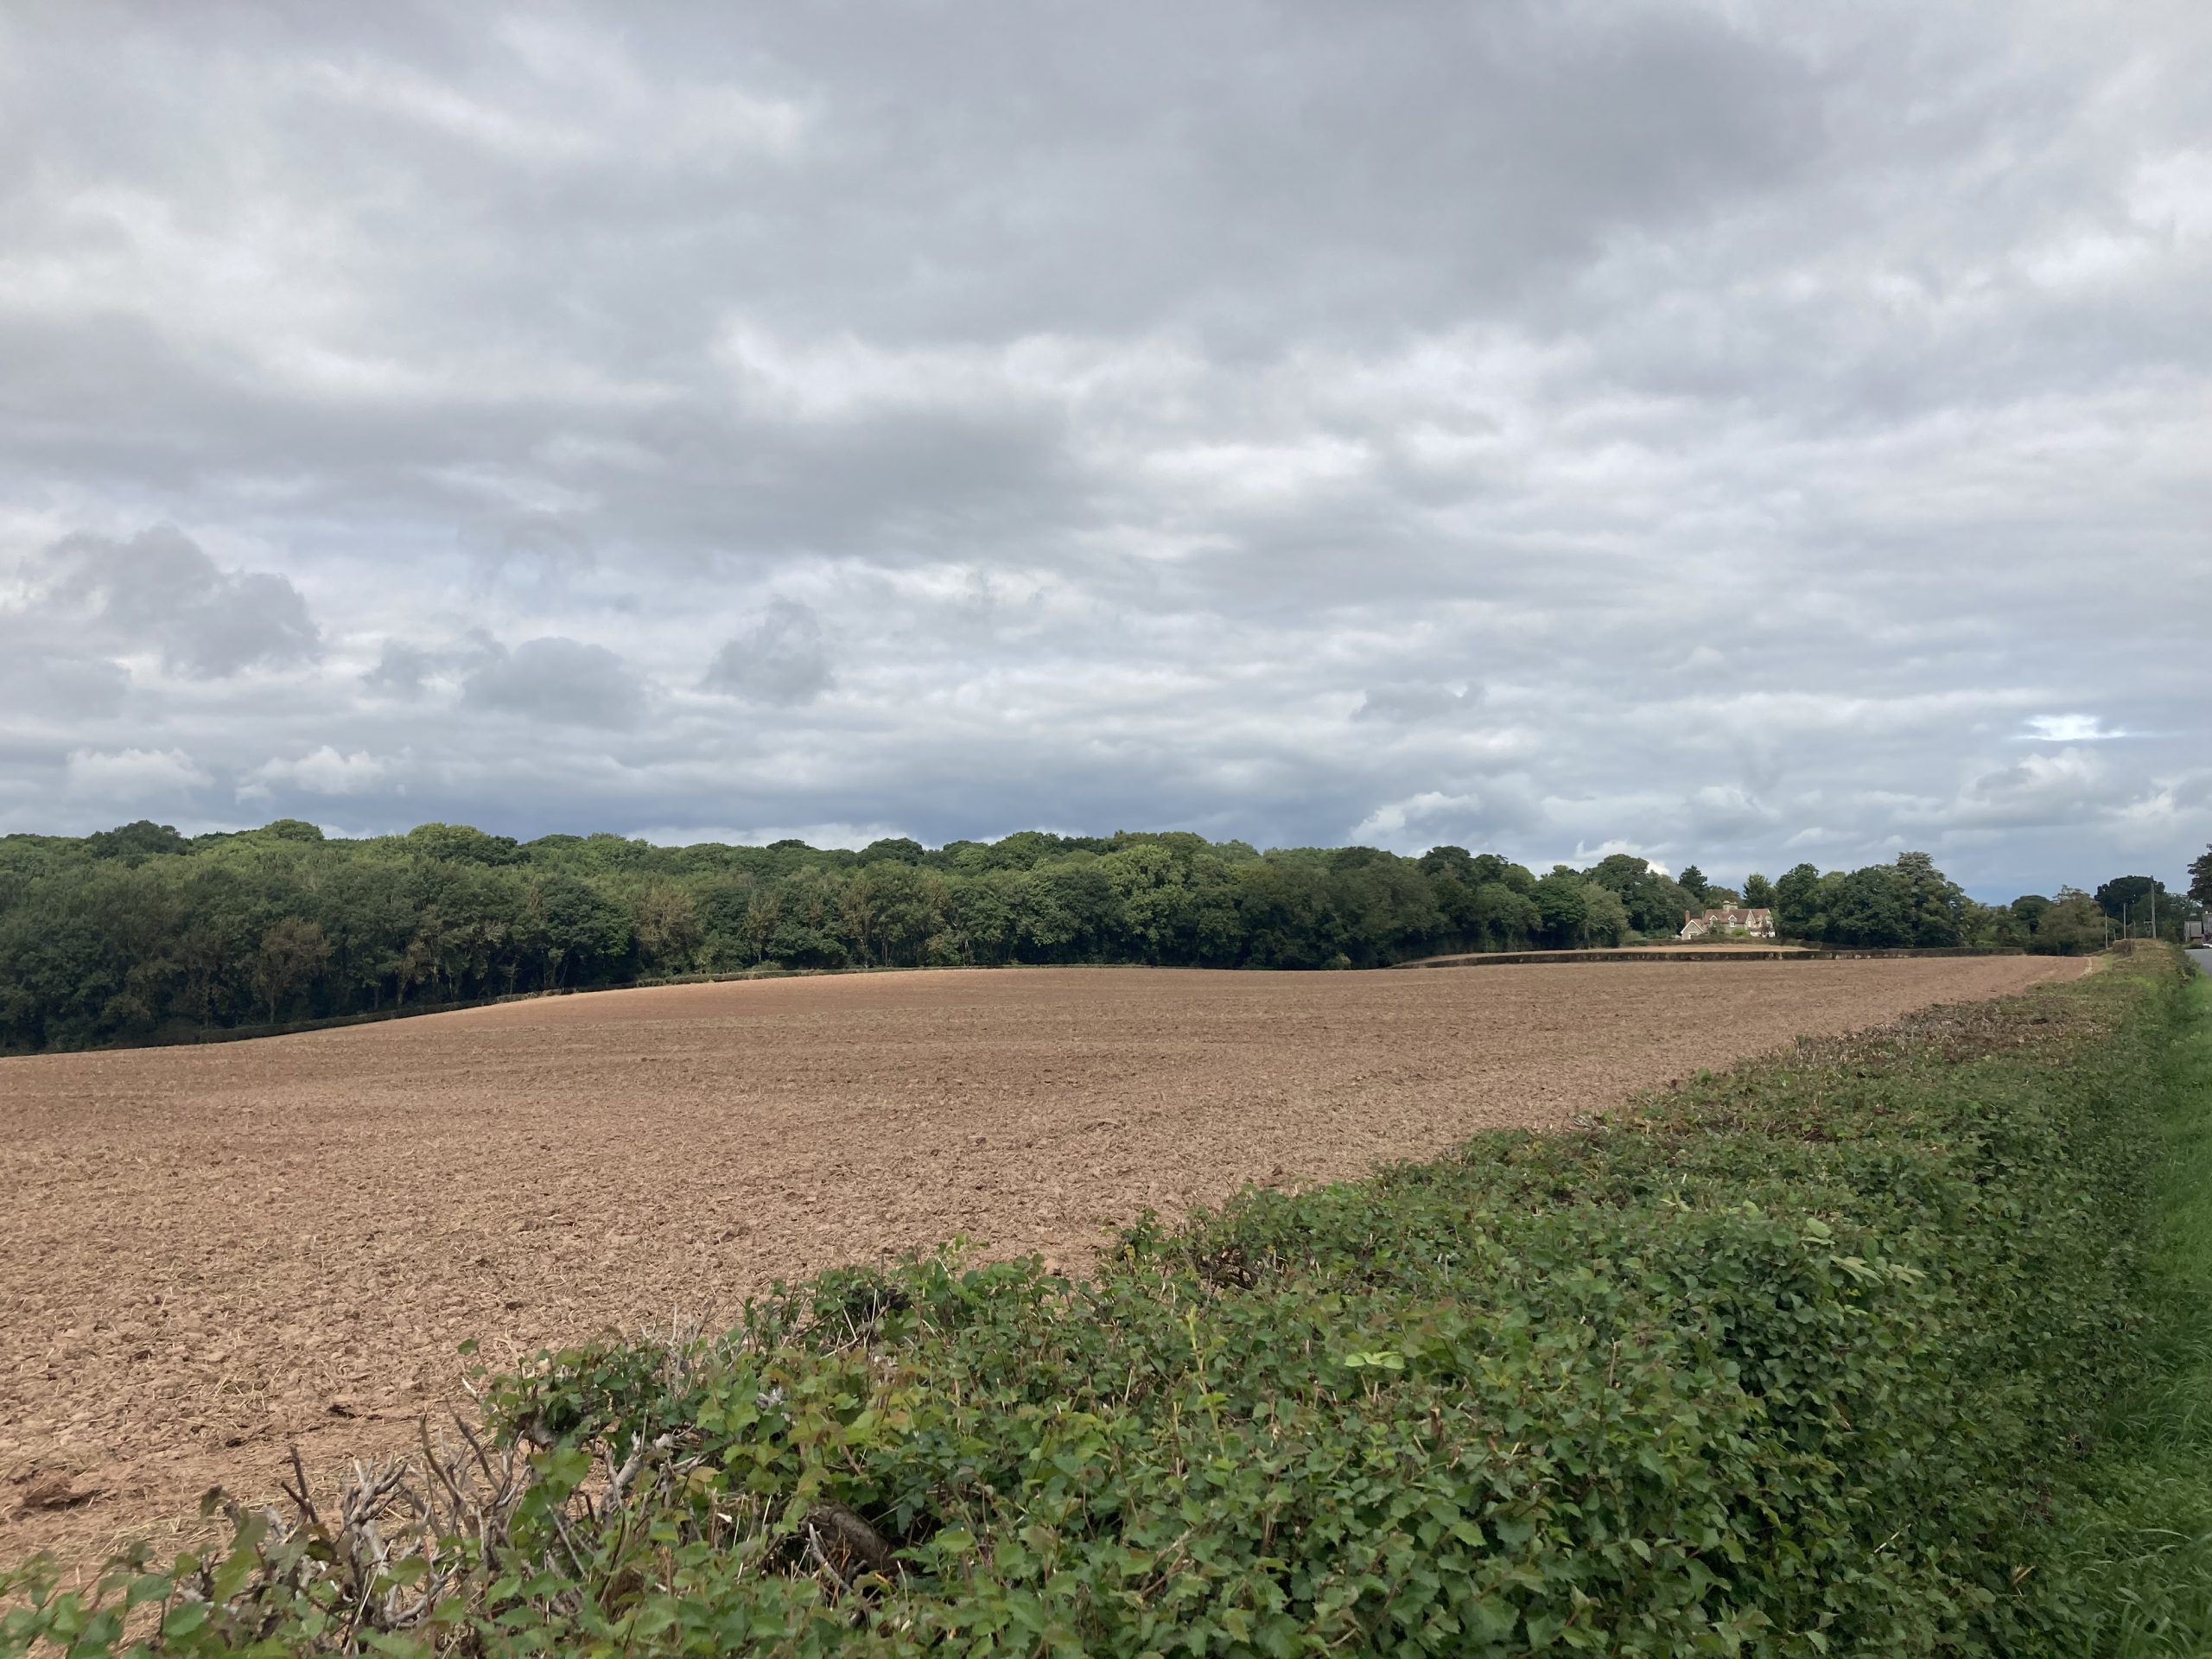 Undulating arable fields and woodlands